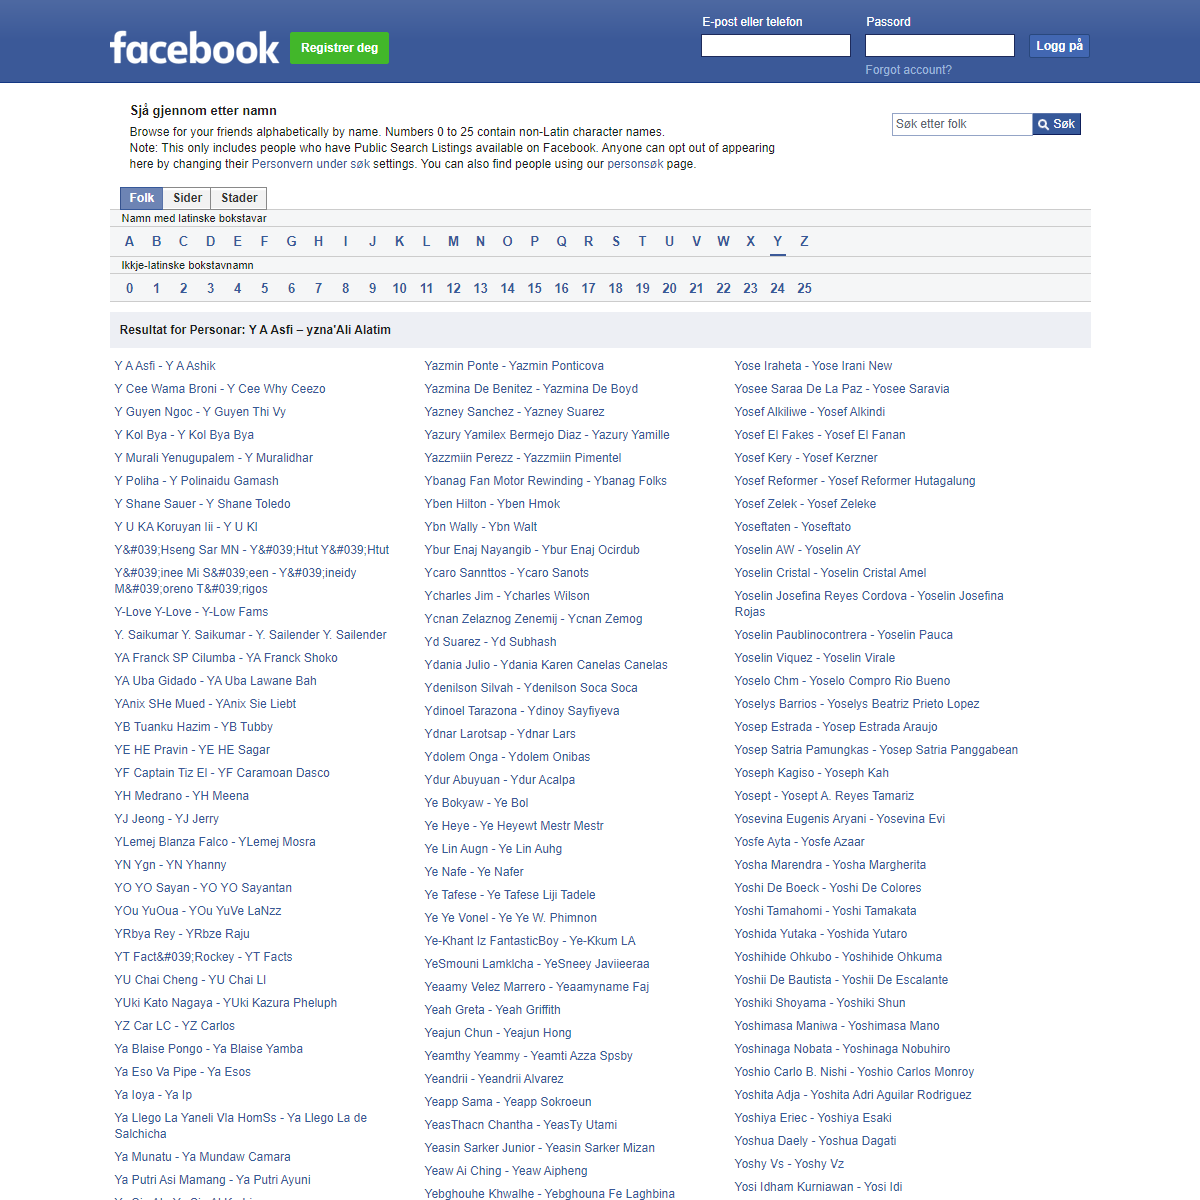 A complete backup of https://nn-no.facebook.com/directory/people/Y